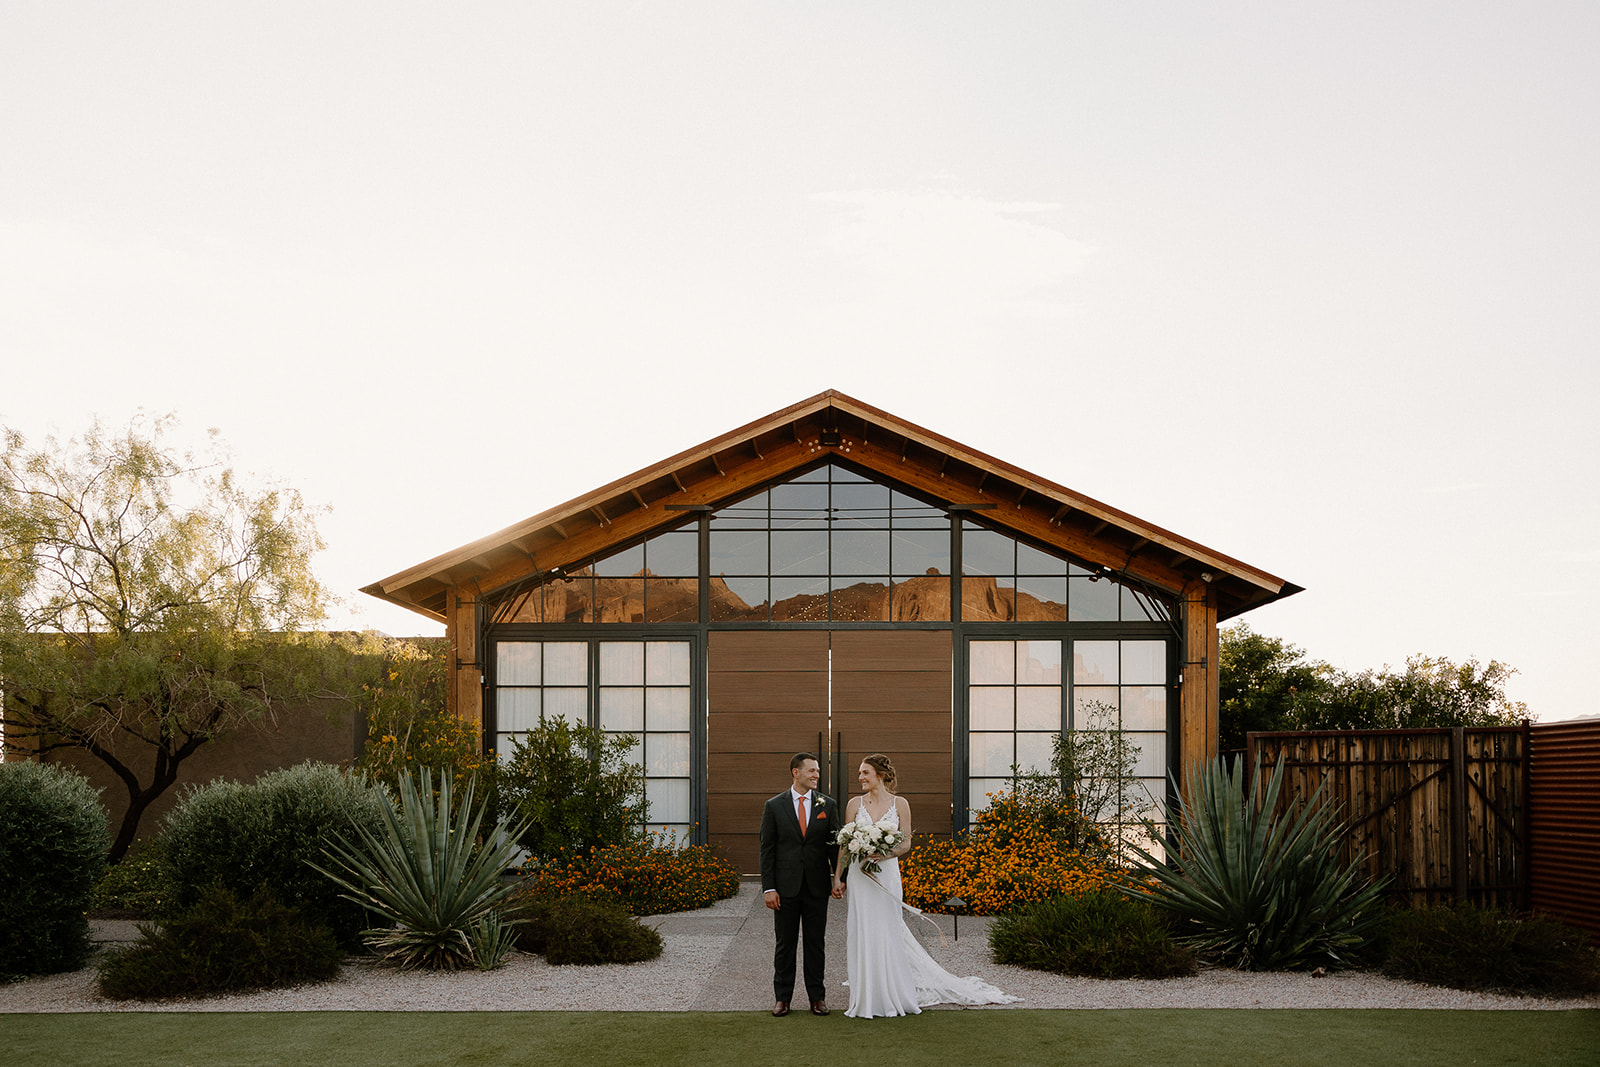 Stunning bride and groom. pose with the dreamy AZ desert wedding venue in the background